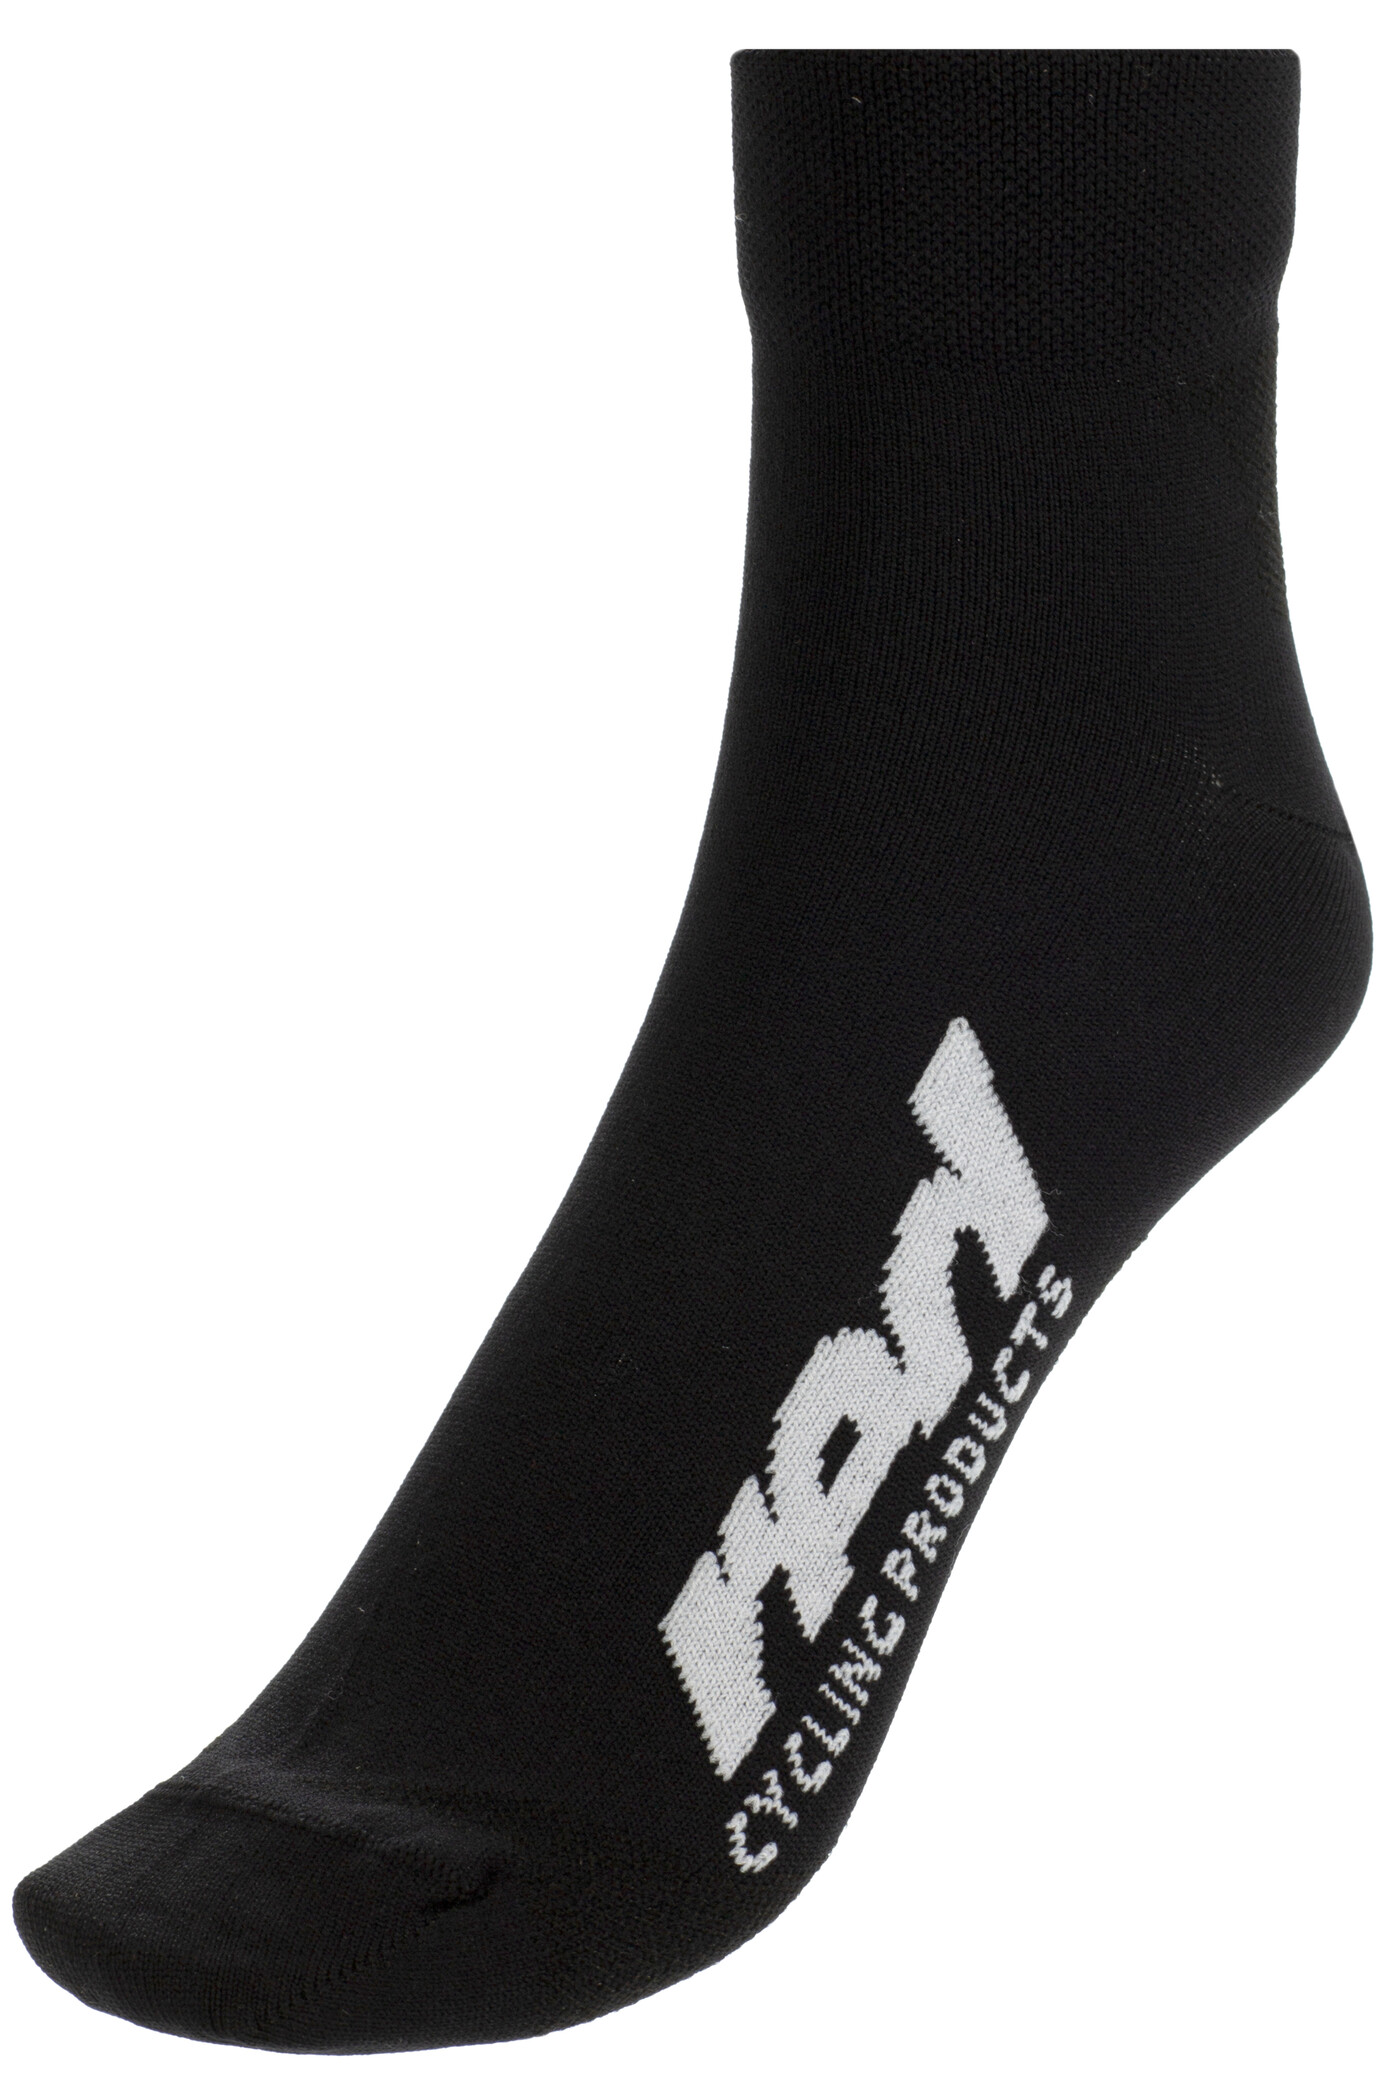 Uk seller Cycling socks 6-12 mens/womens,9 different colours 2 types available 